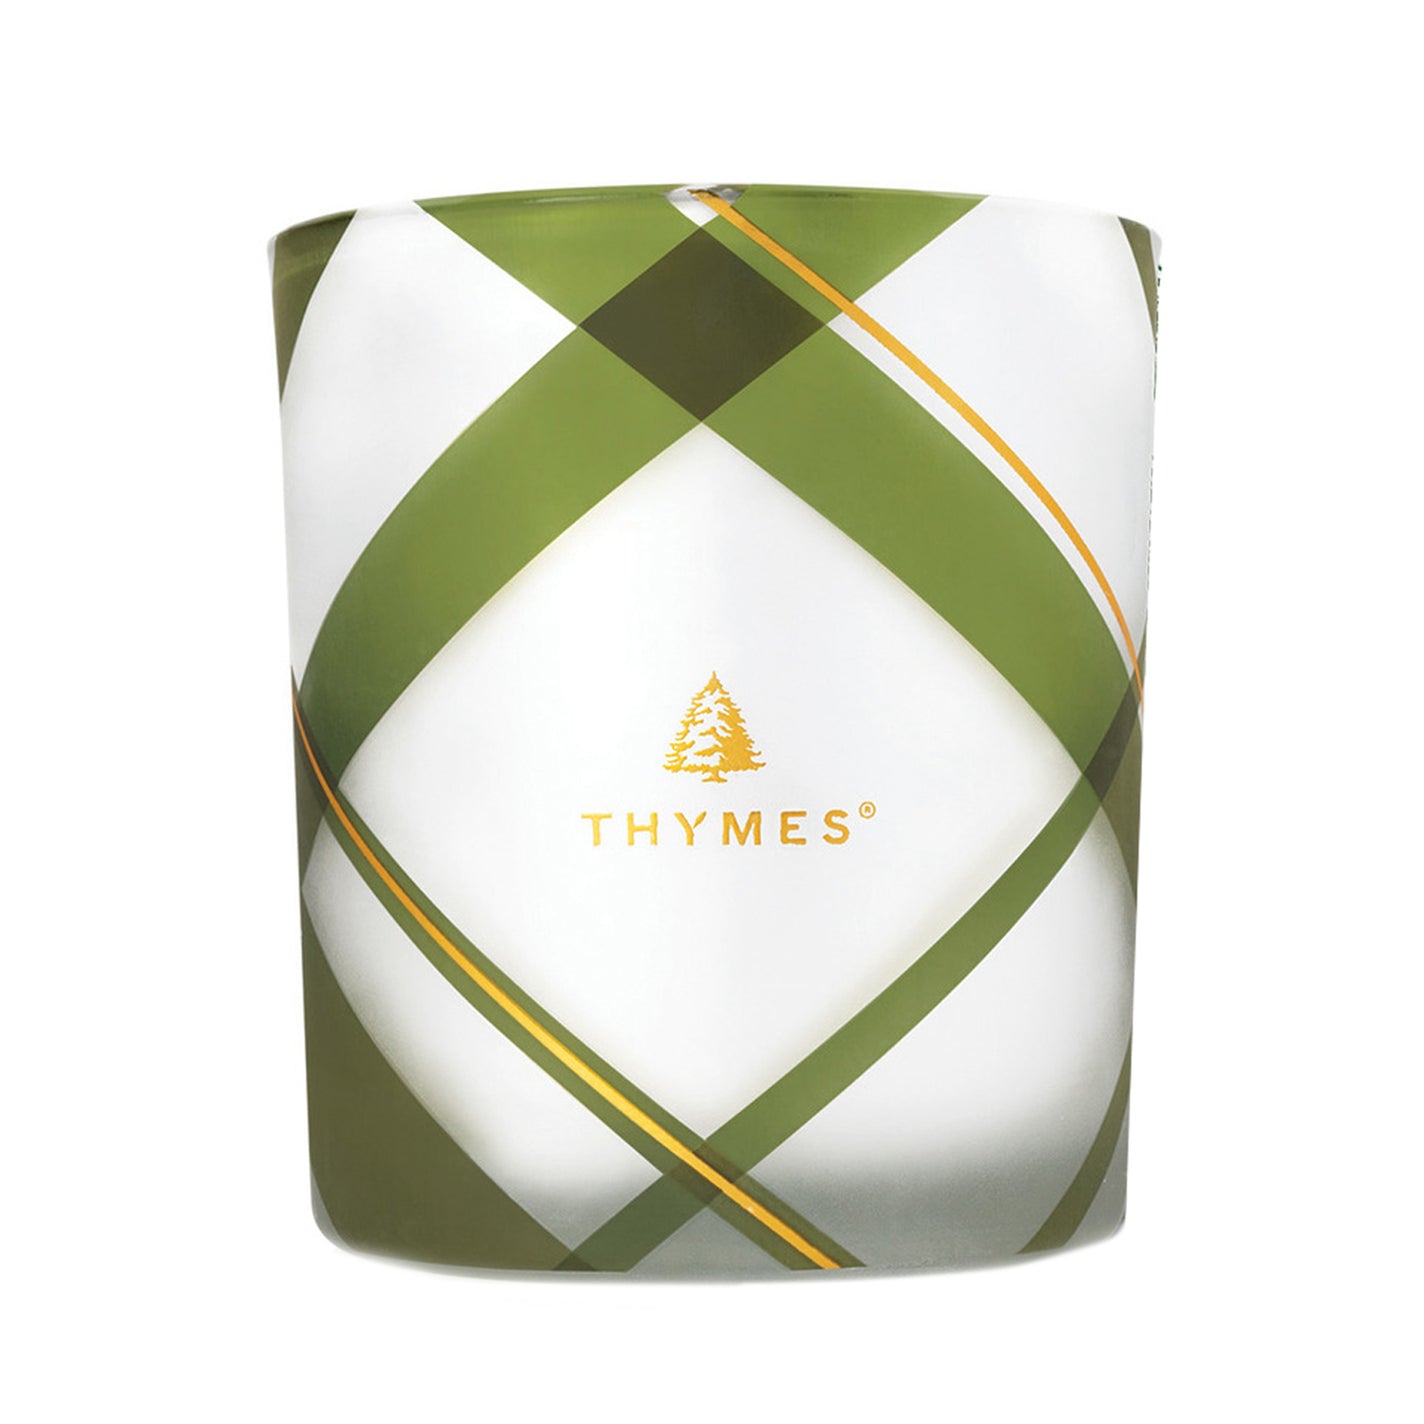 Thymes Frasier Fir Plaid Boxed Candle